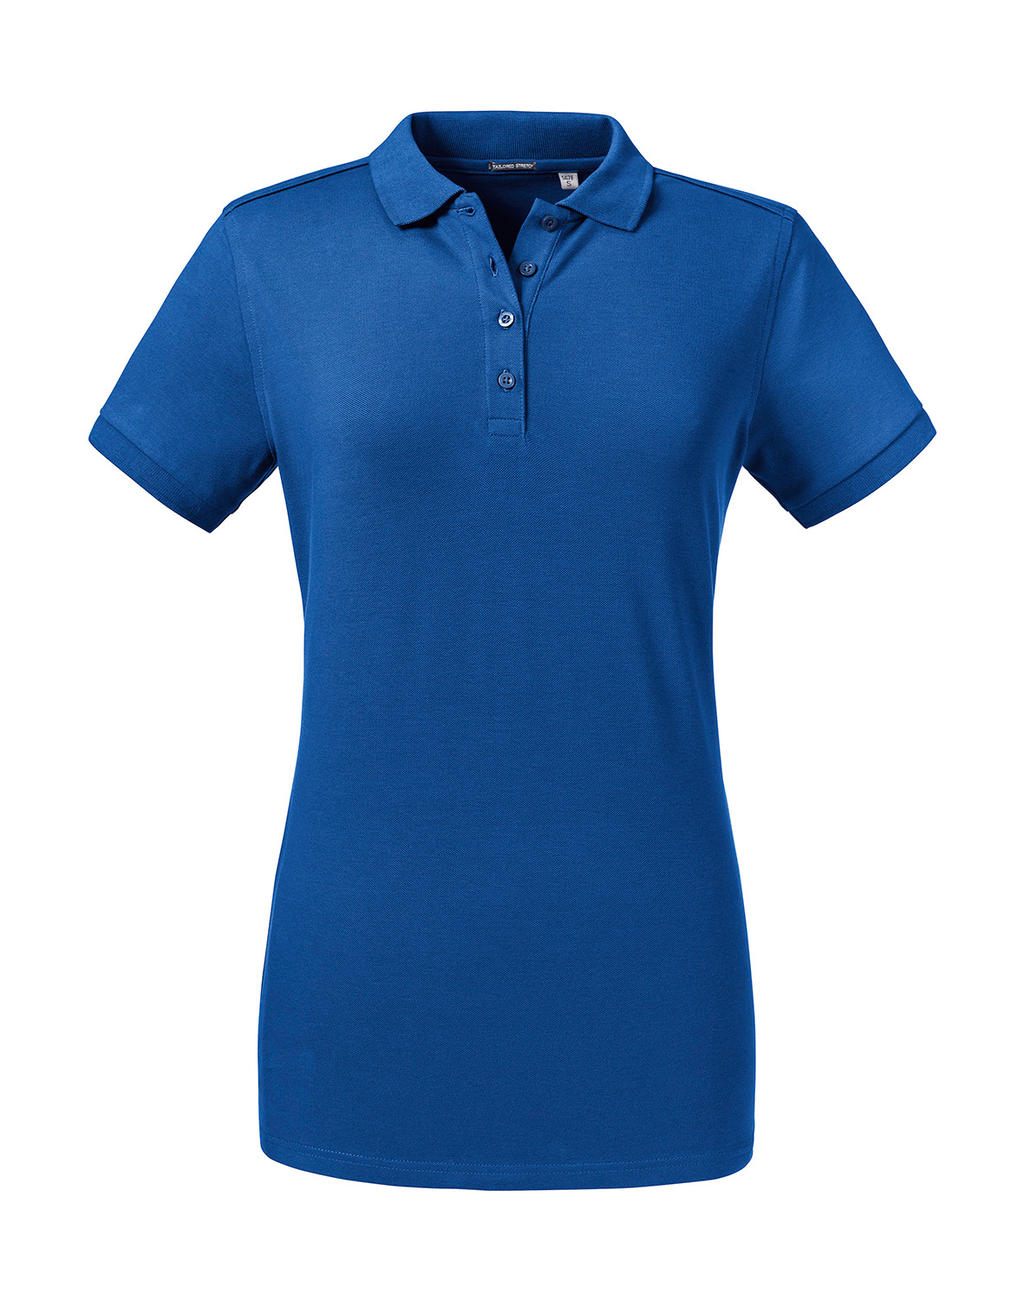  Ladies Tailored Stretch Polo in Farbe Bright Royal